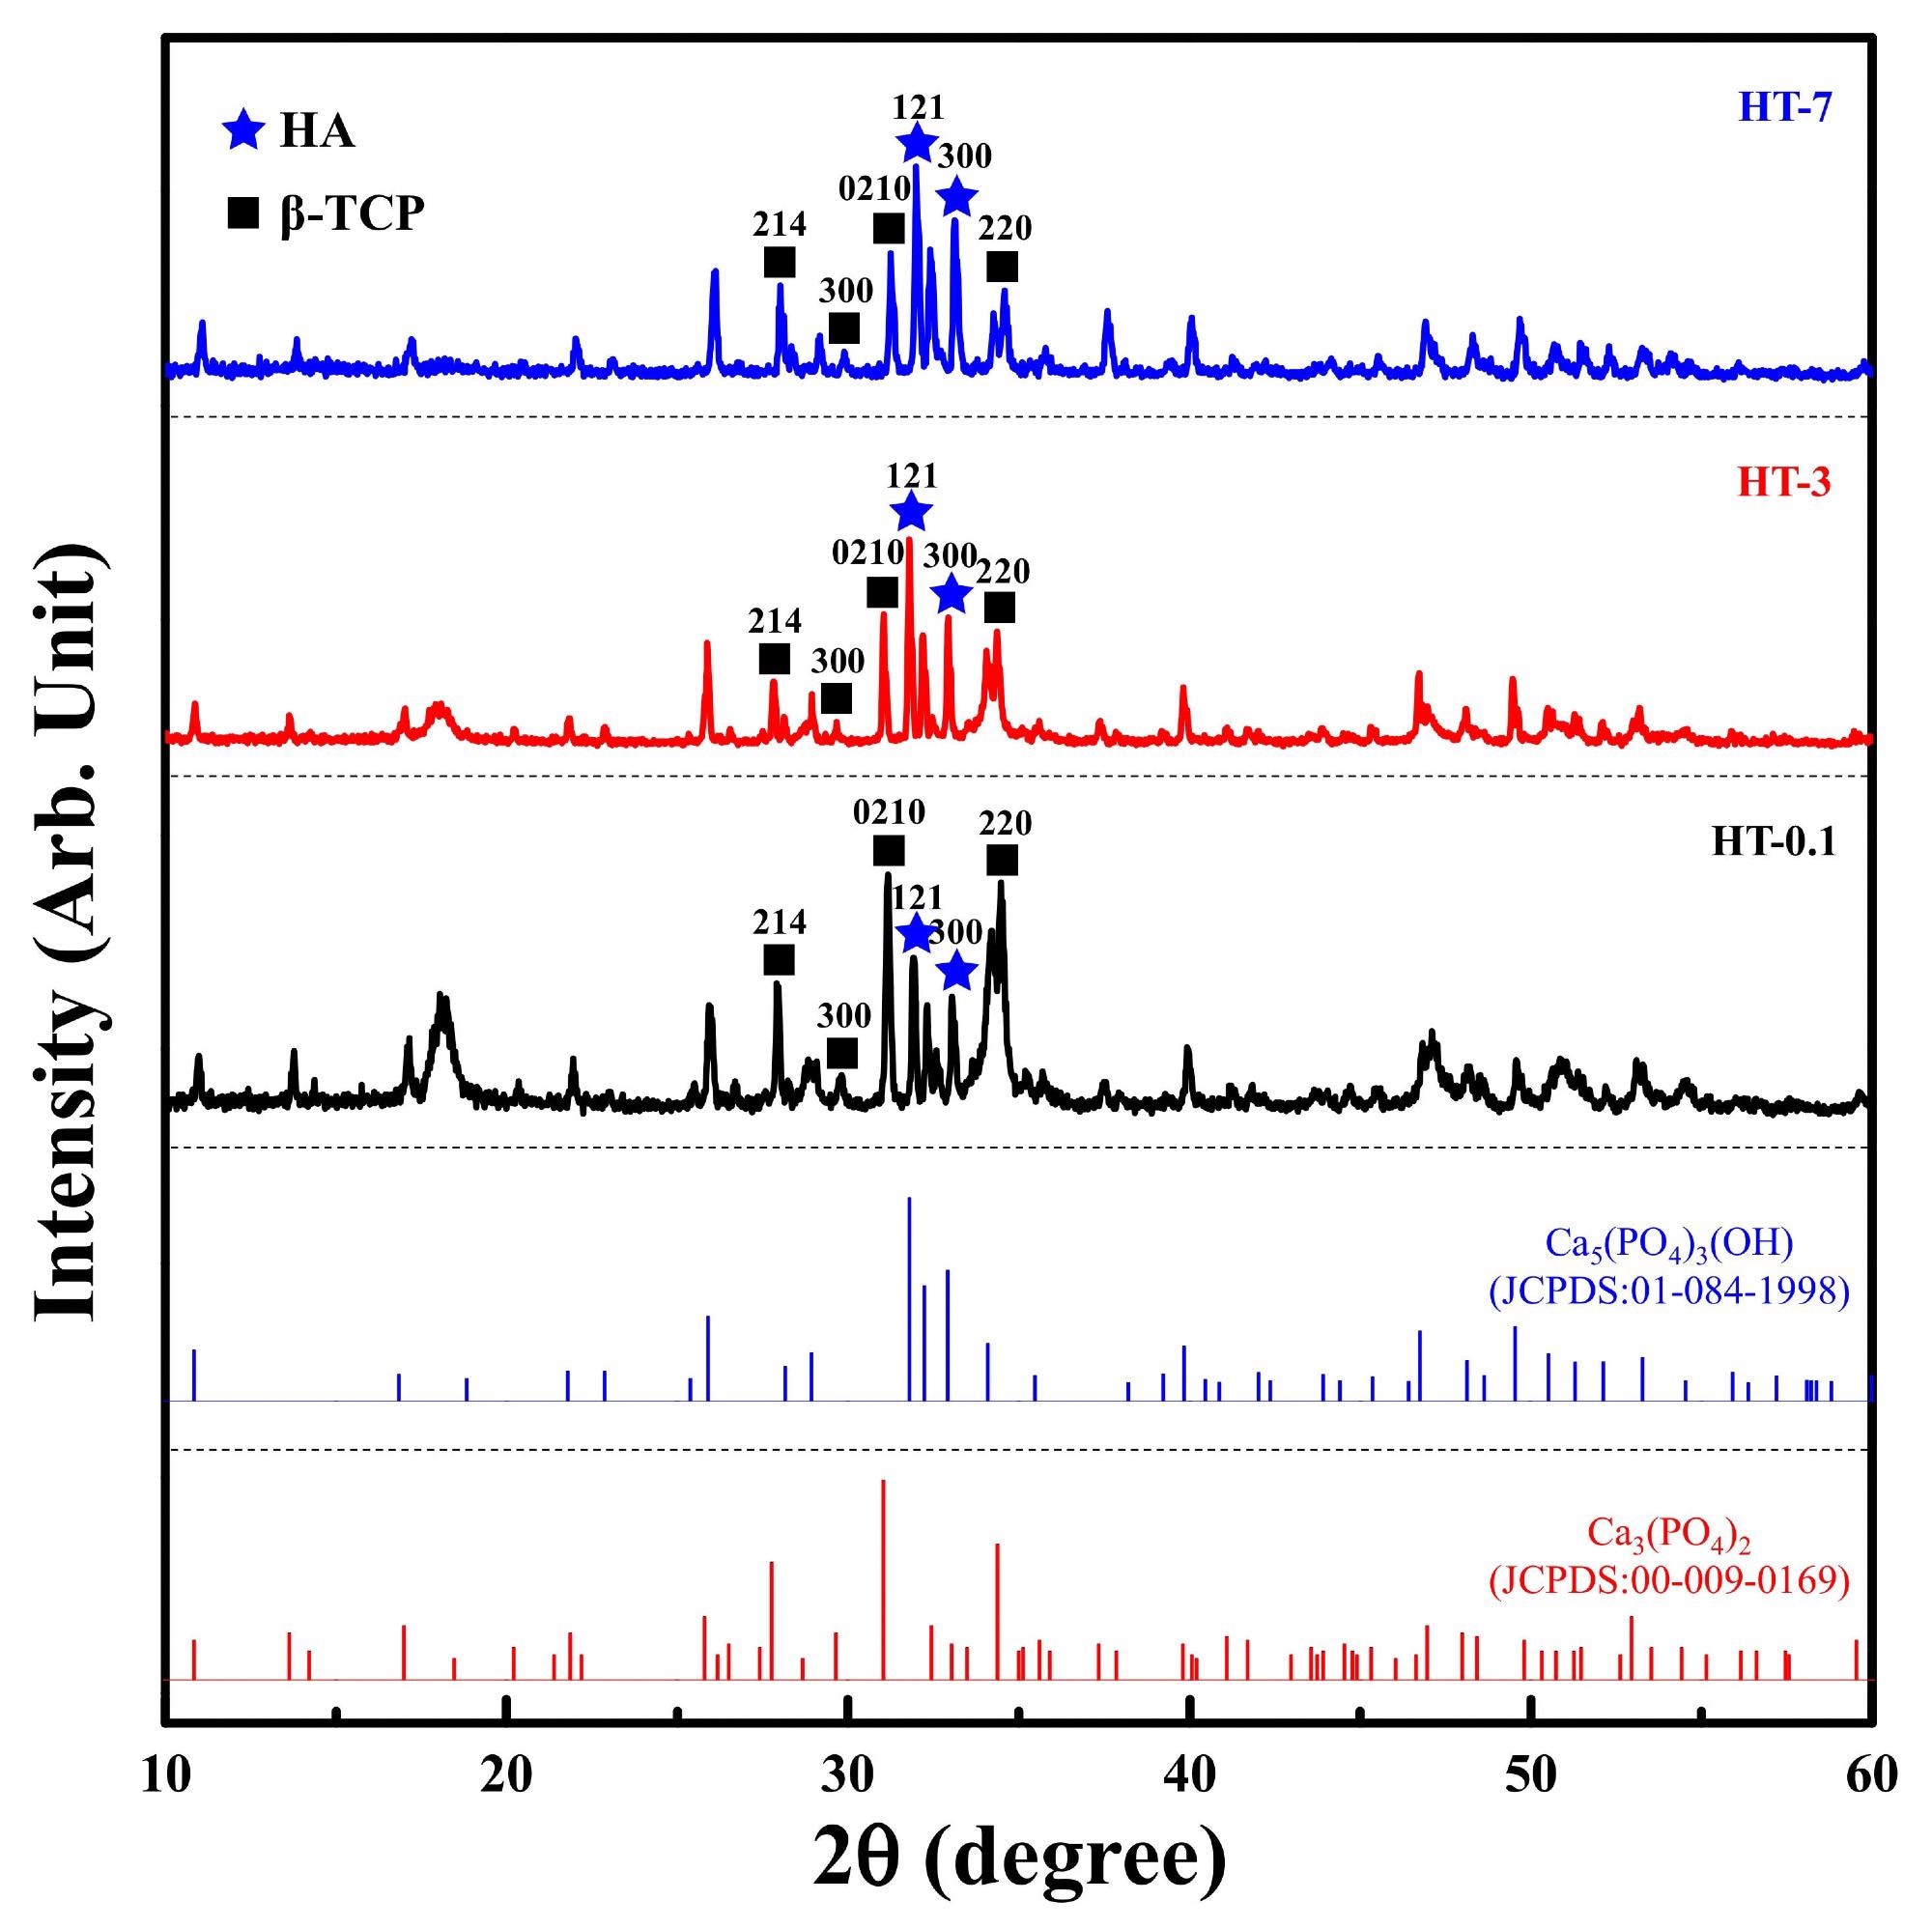 XRD patterns of the samples prepared by the heat treatment of as-prepared coral and DCPA at various durations, including reference spectra for JCPDS 01-084-1988 and 00-009-0169.